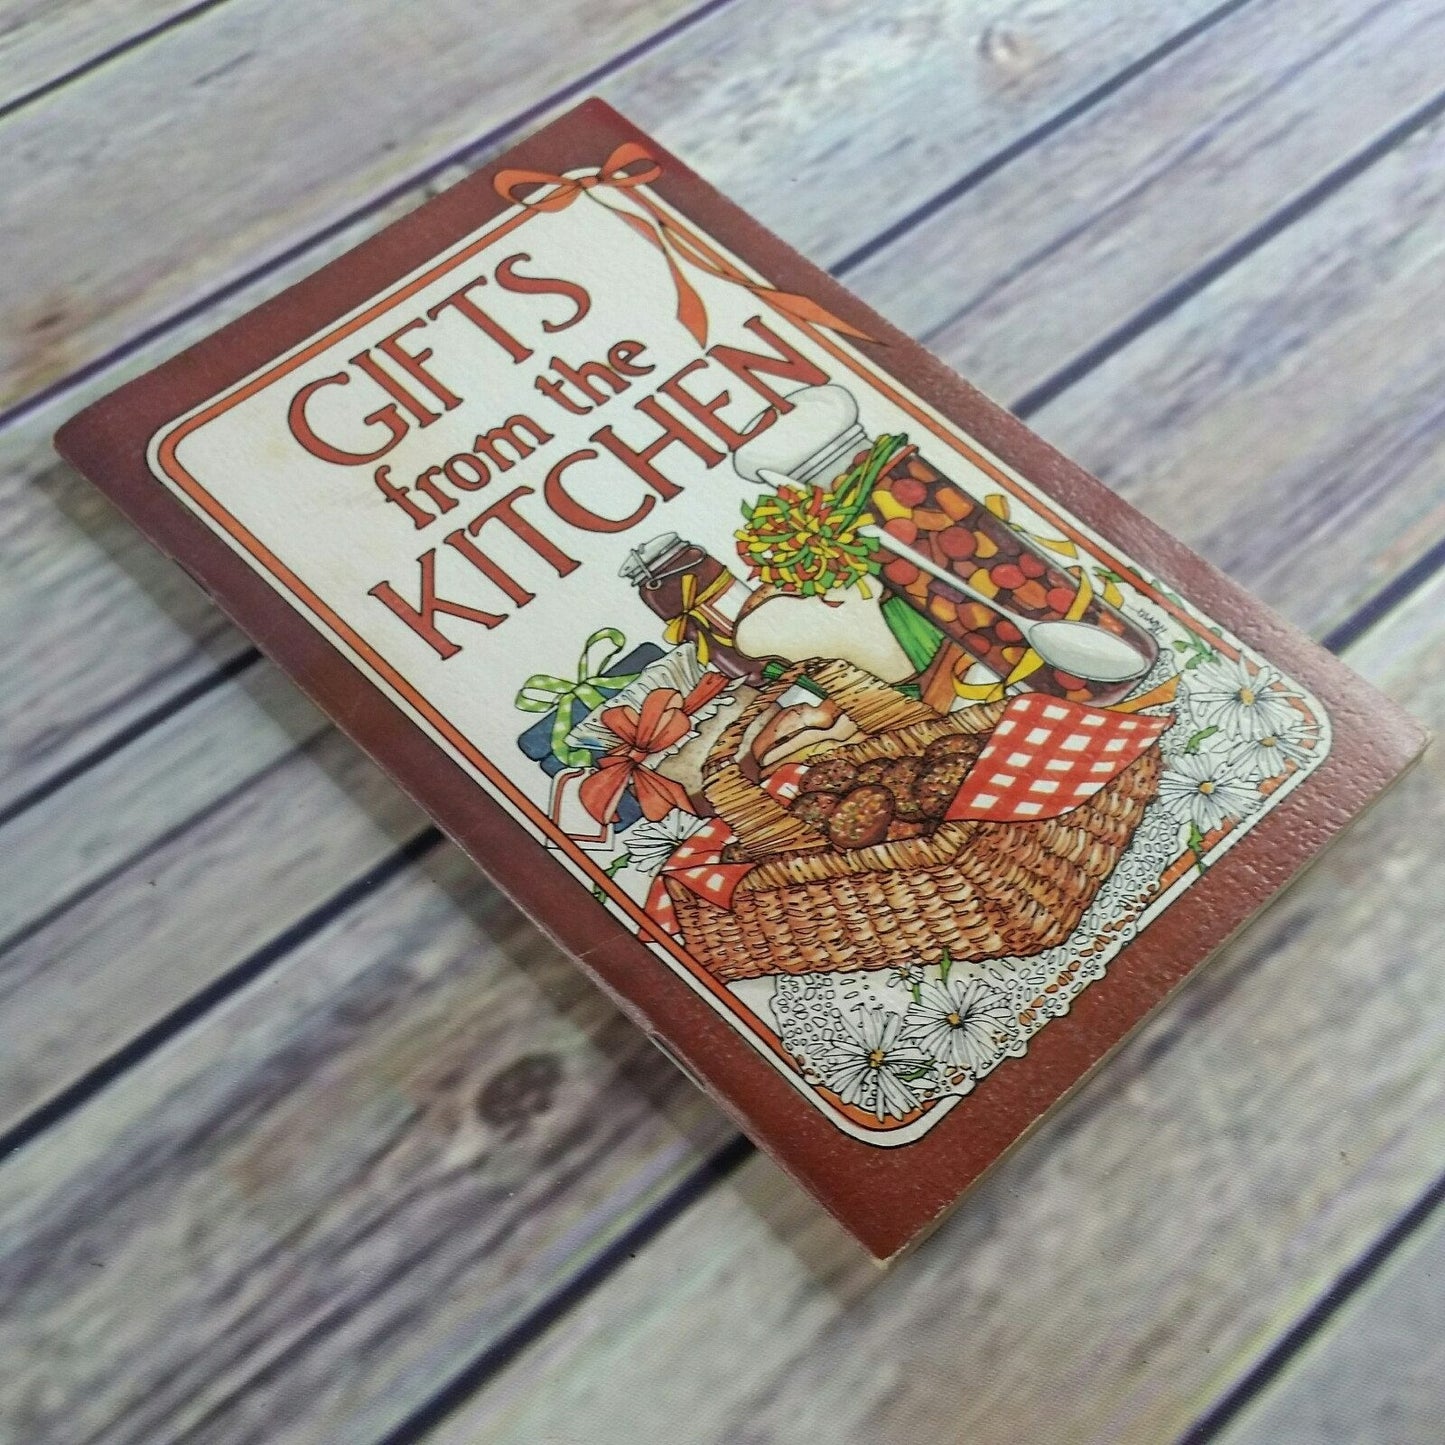 Vintage Cookbook Gifts from the Kitchen Irena Chalmers 1979 Recipes Potpourri Press Paperback Booklet